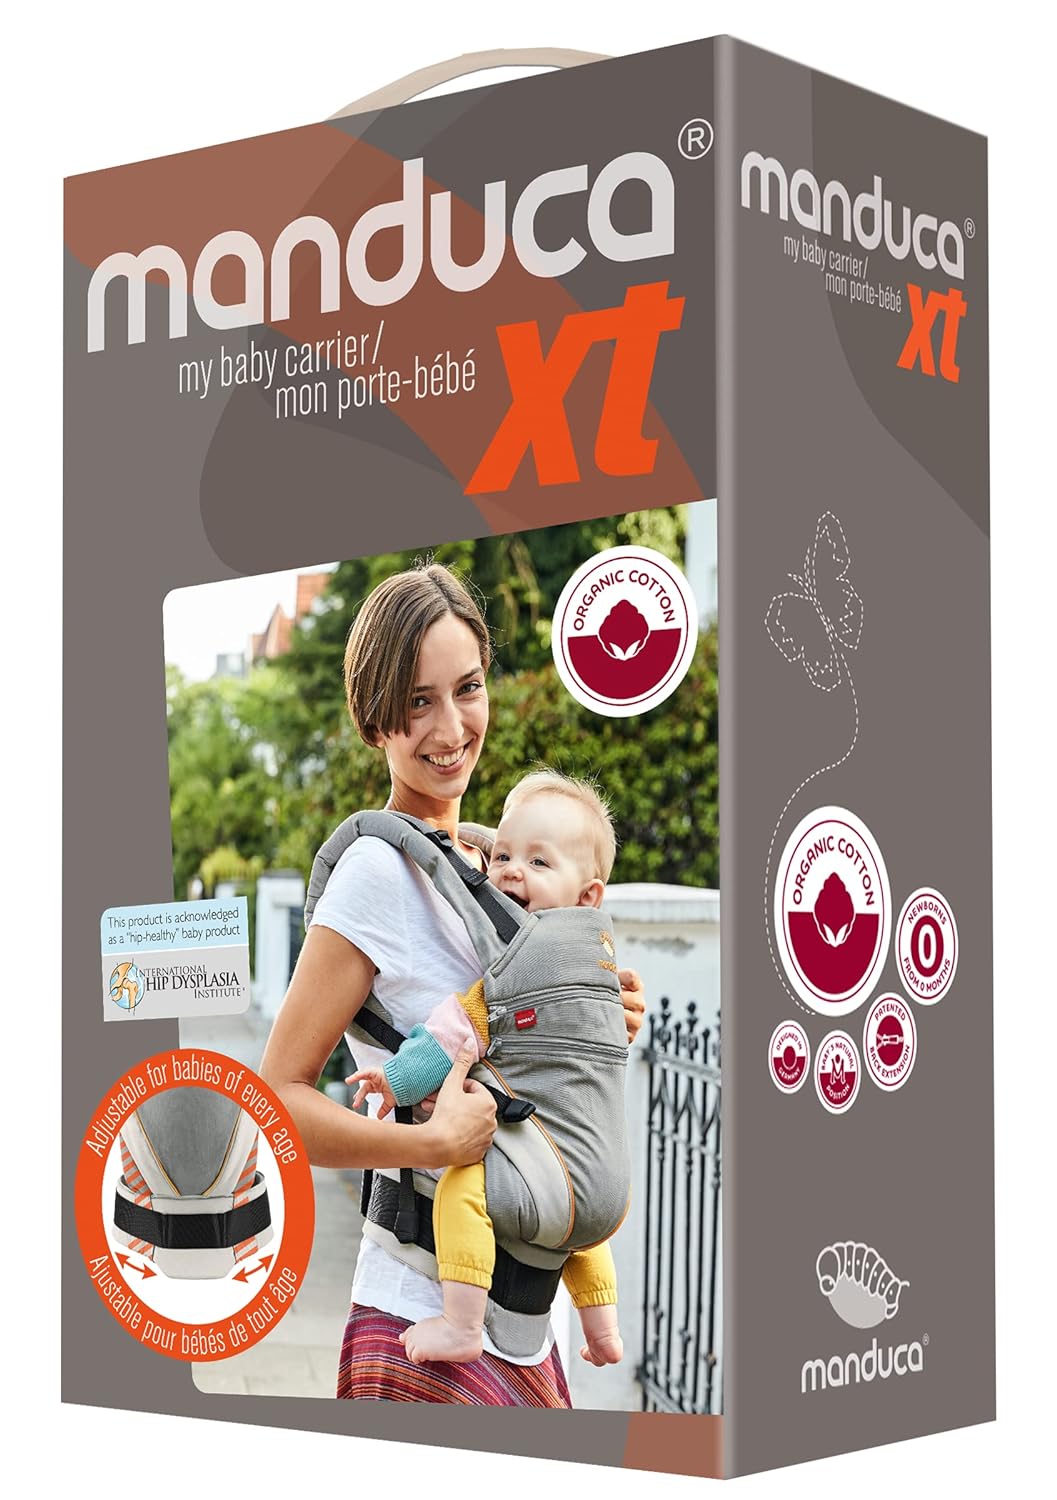 Manduca XT > bellybutton SoftBlossom Light < All-In-One Baby Carrier for Newborns from Birth, Babies & Toddlers (3.5 - 20 kg), Adjustable Seat, 3 Carrying Positions, Organic Cotton